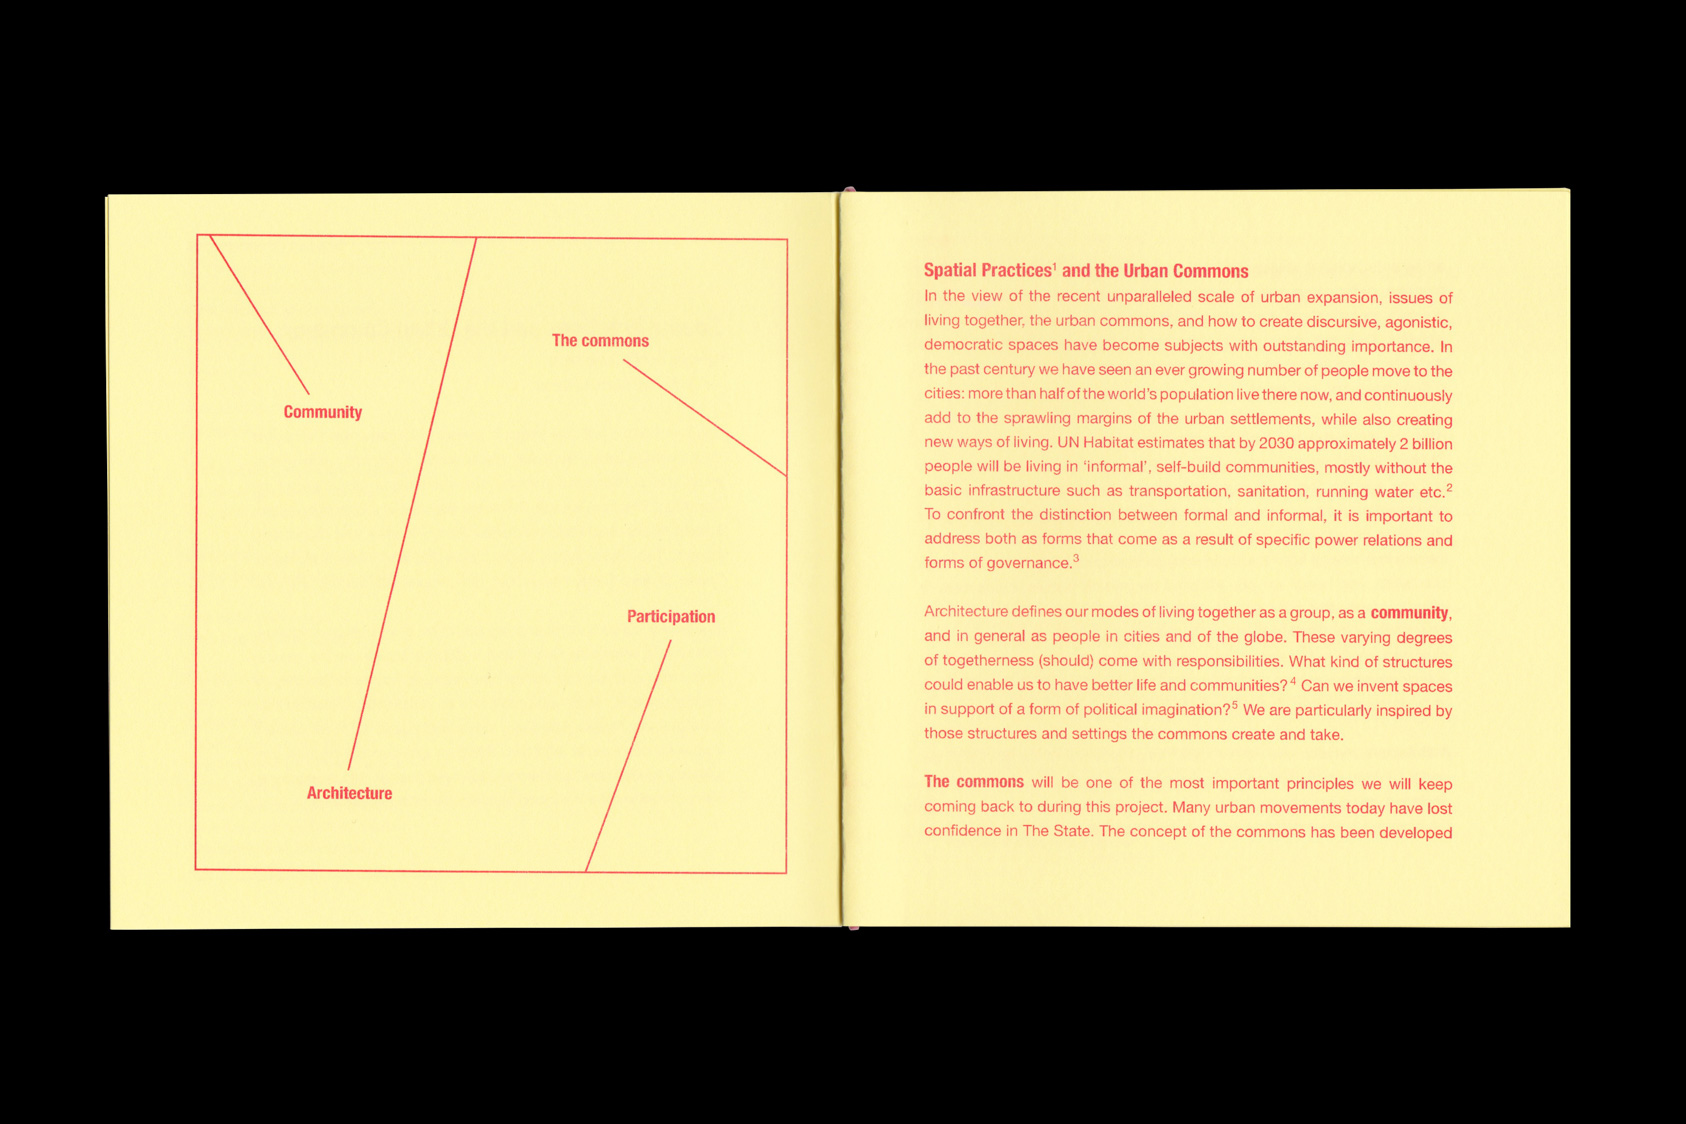 Spatial Practices and the Urban Commons - publication accompanying exhibition for Tenderpixel, 2016 by the agency for emerging ideas